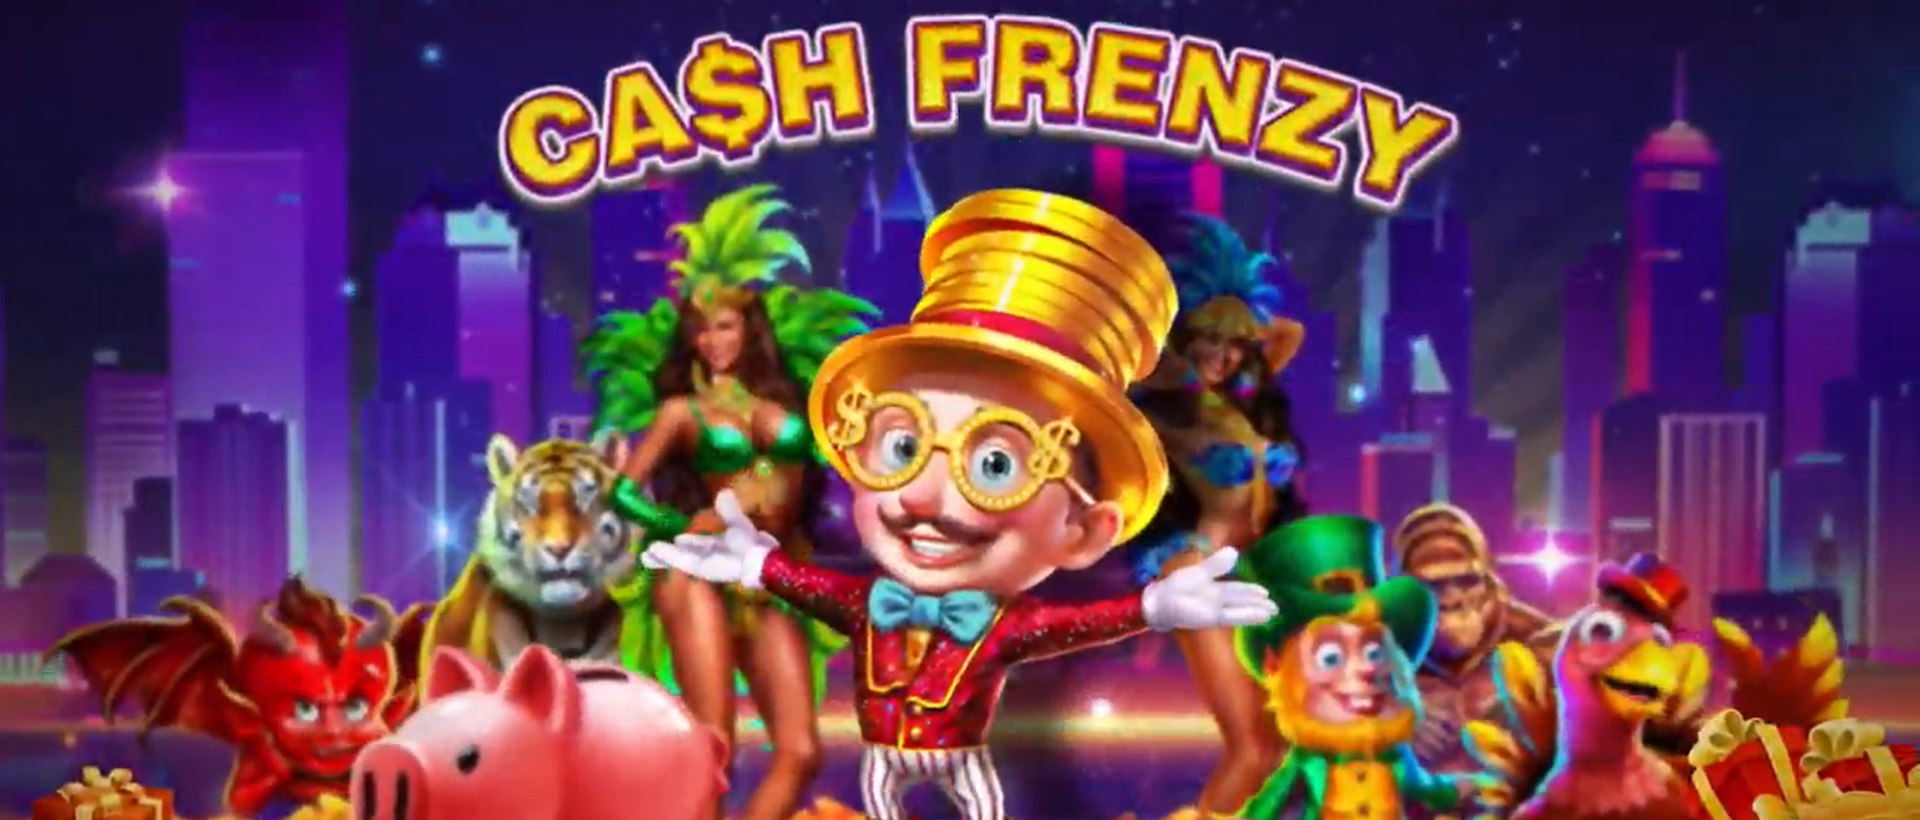 Download Cash Frenzy Casino Top Casino Games on PC with NoxPlayer